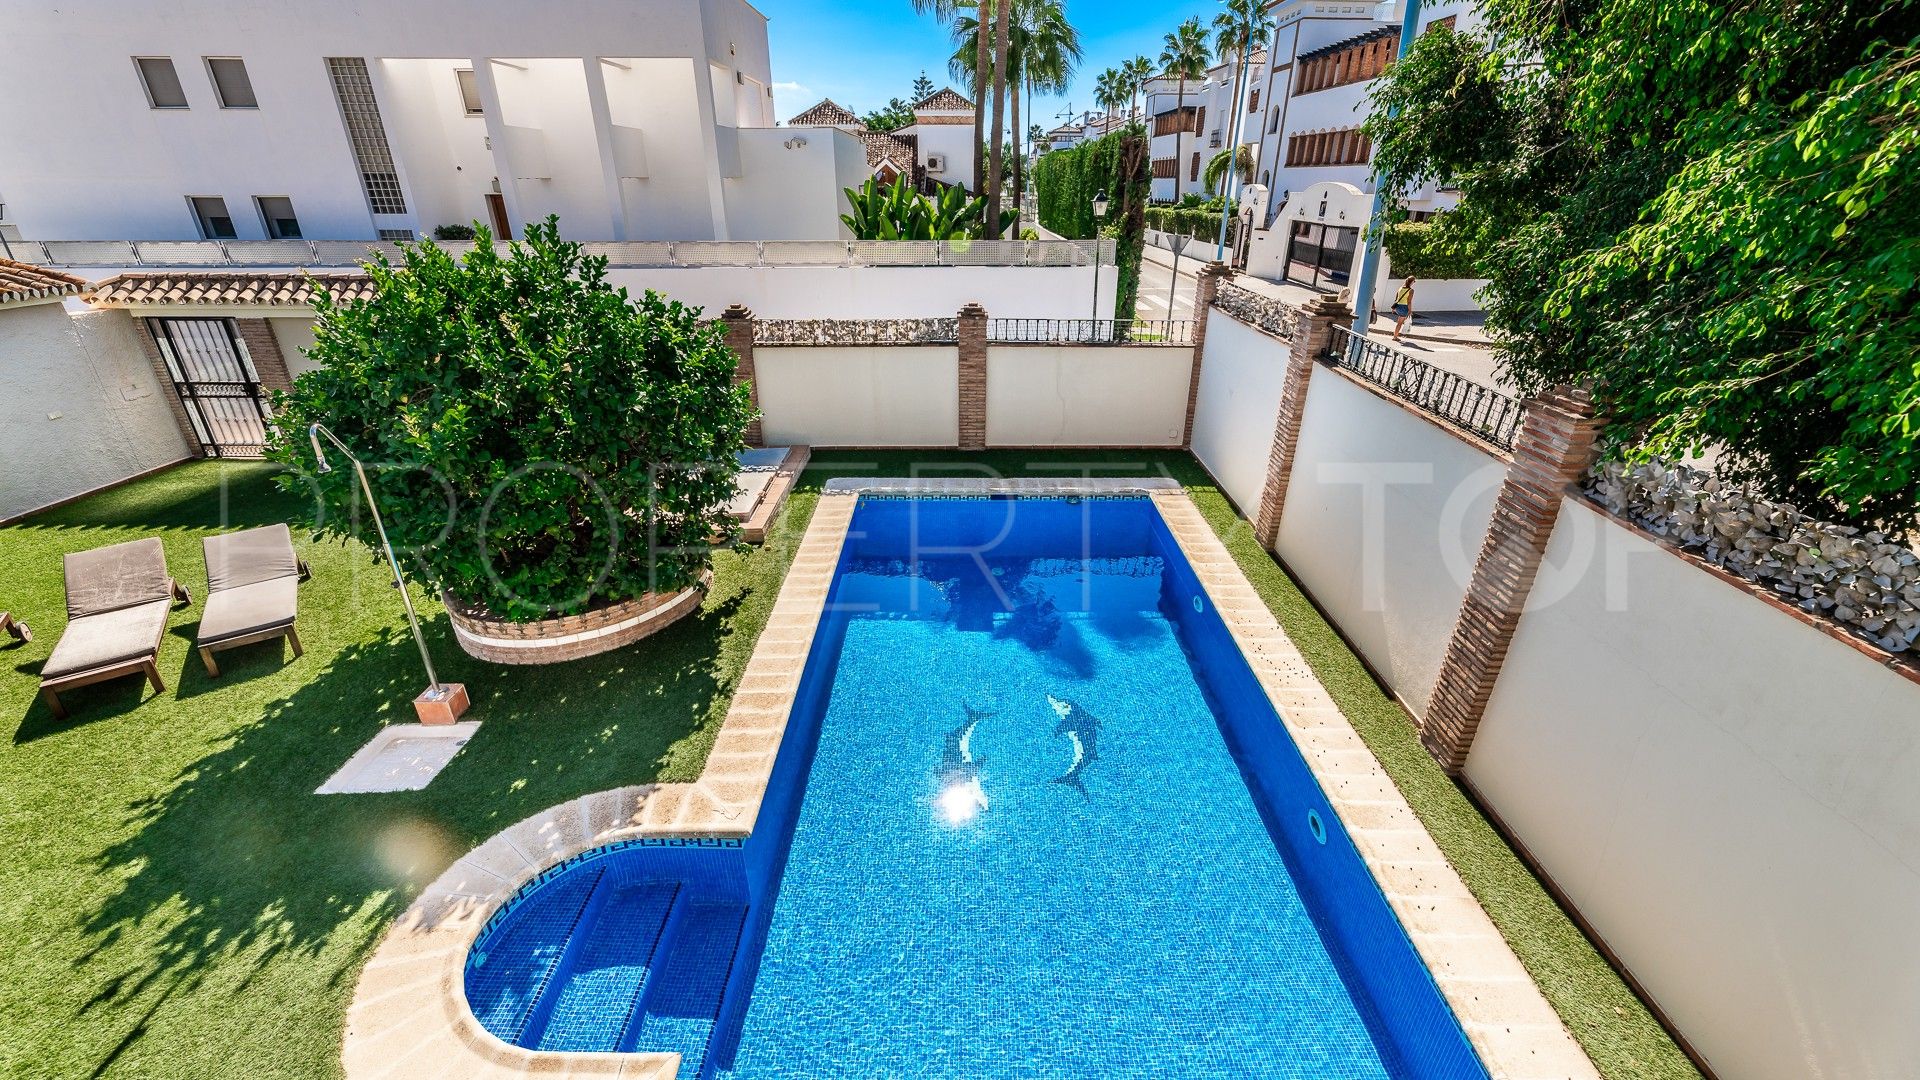 Villa for sale in San Pedro Playa with 5 bedrooms